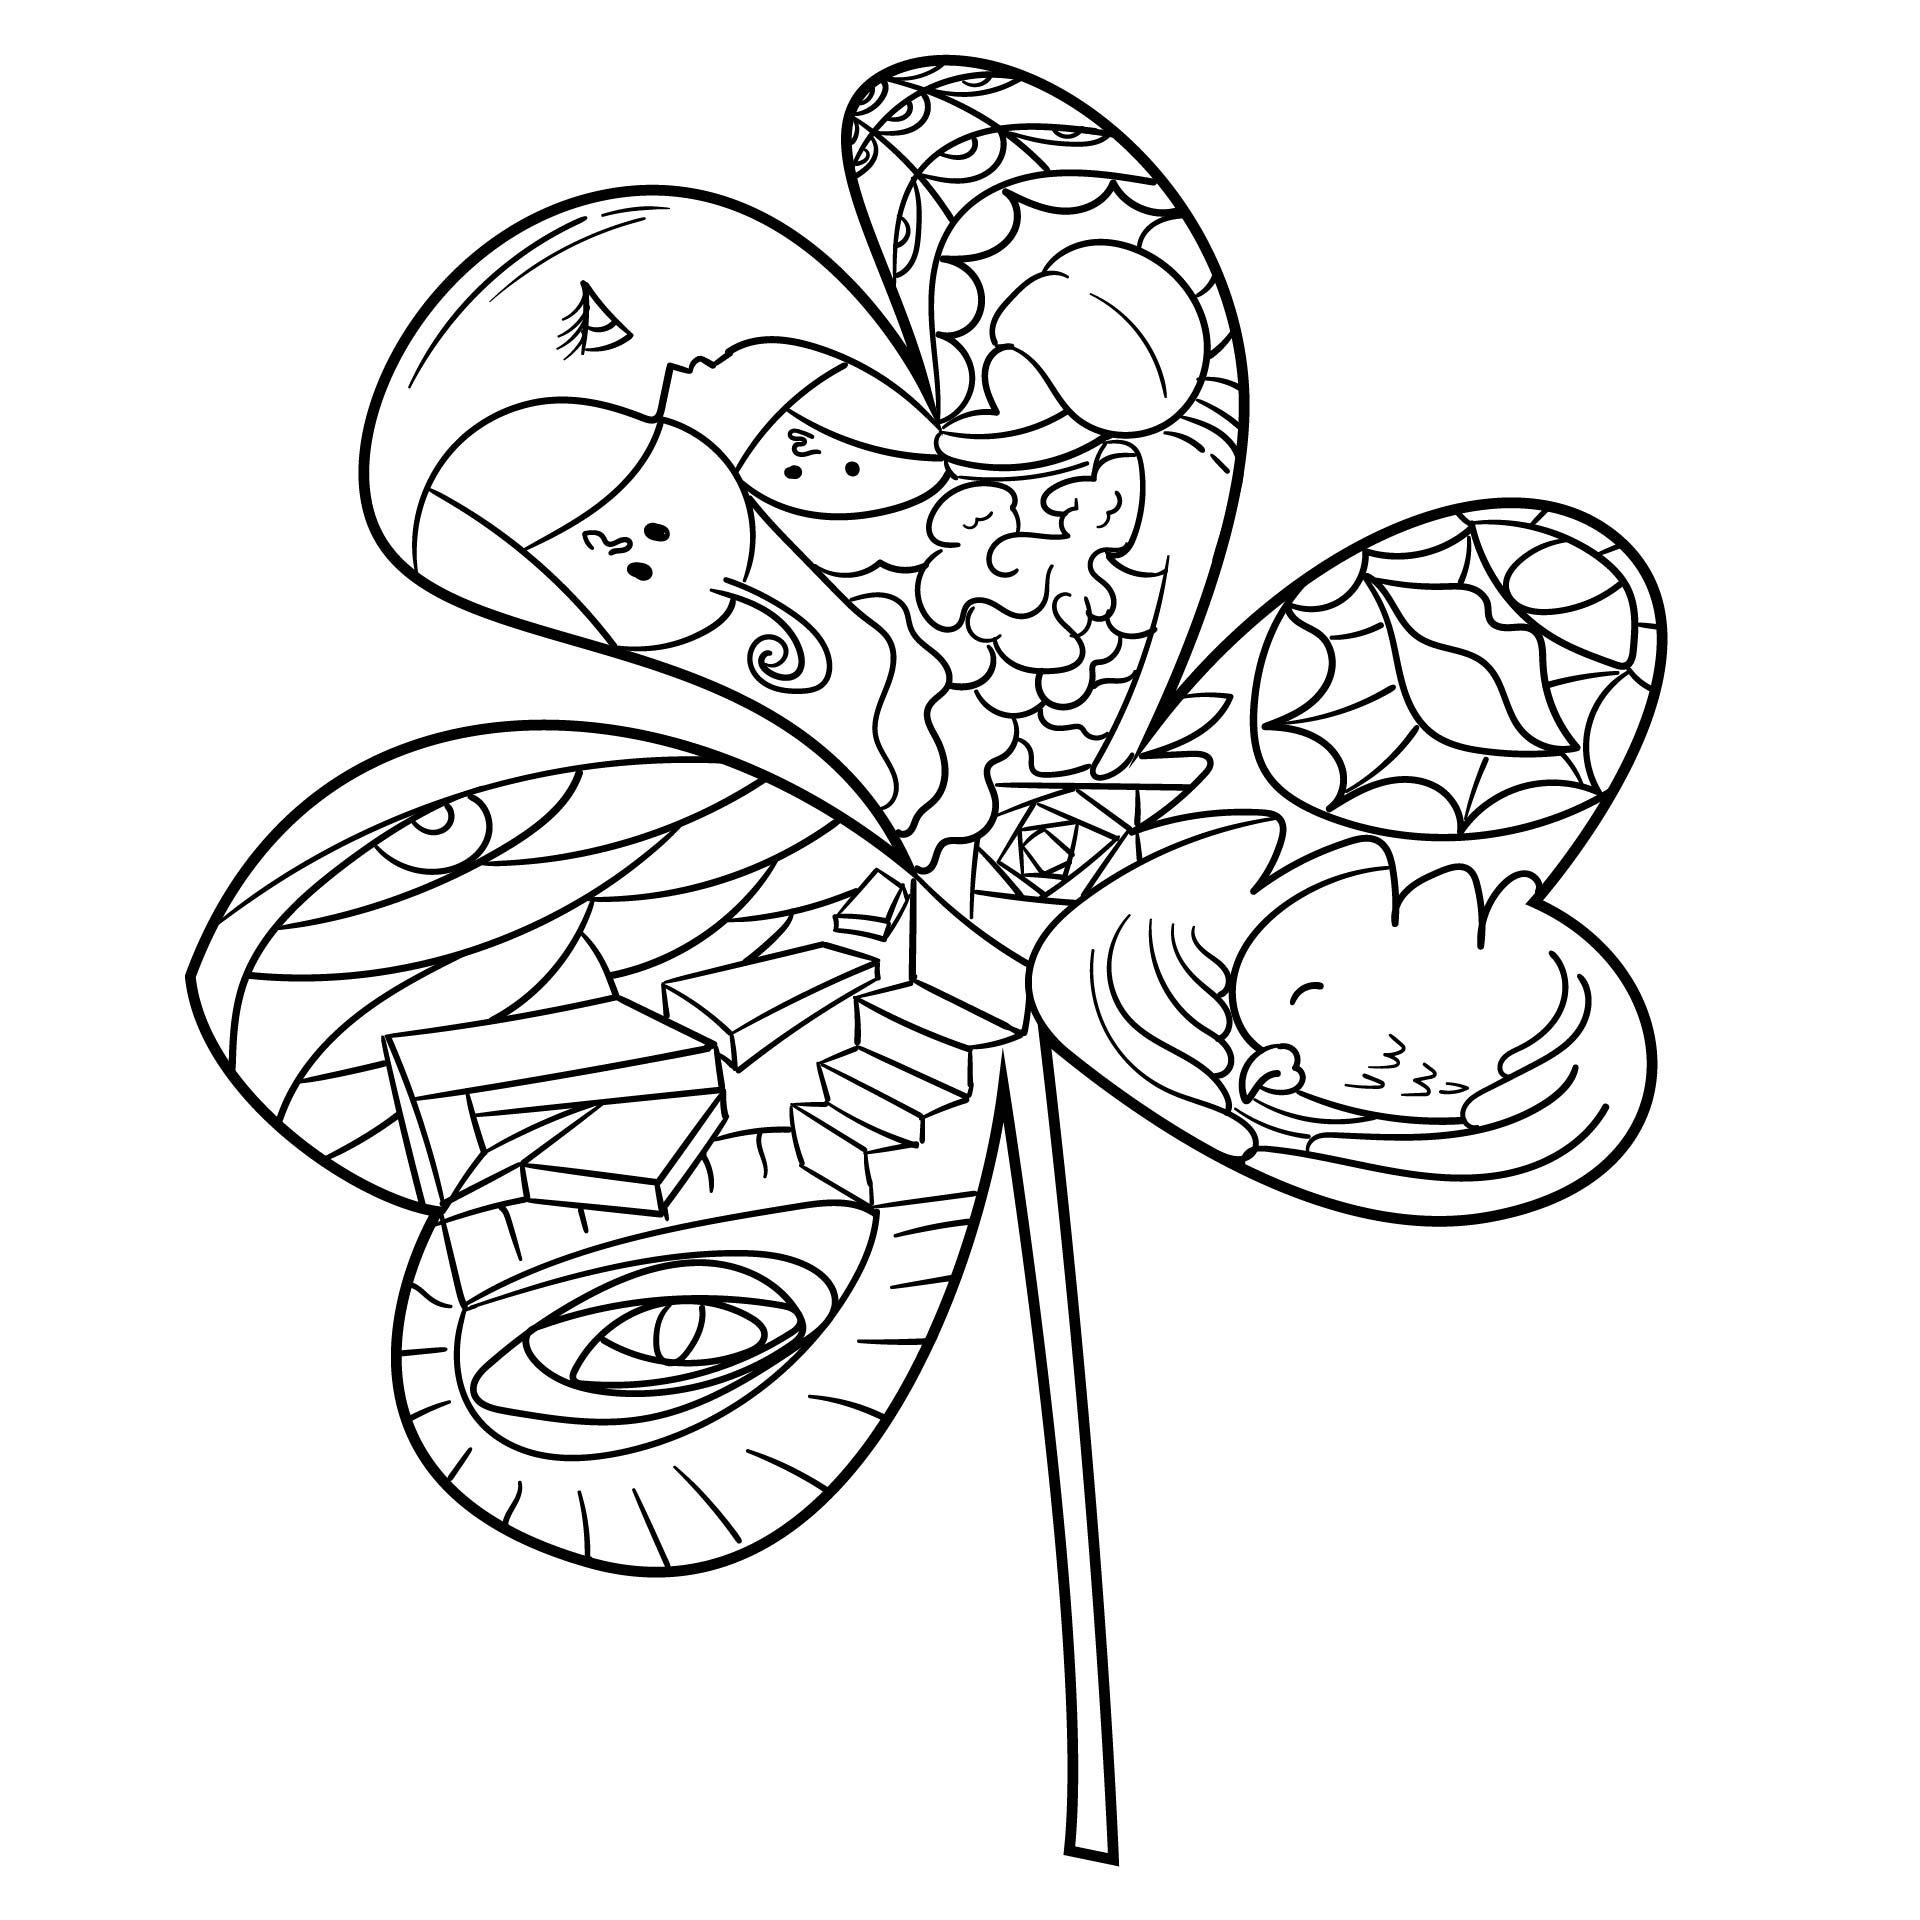 Printable Shamrock Coloring Pages For Adults